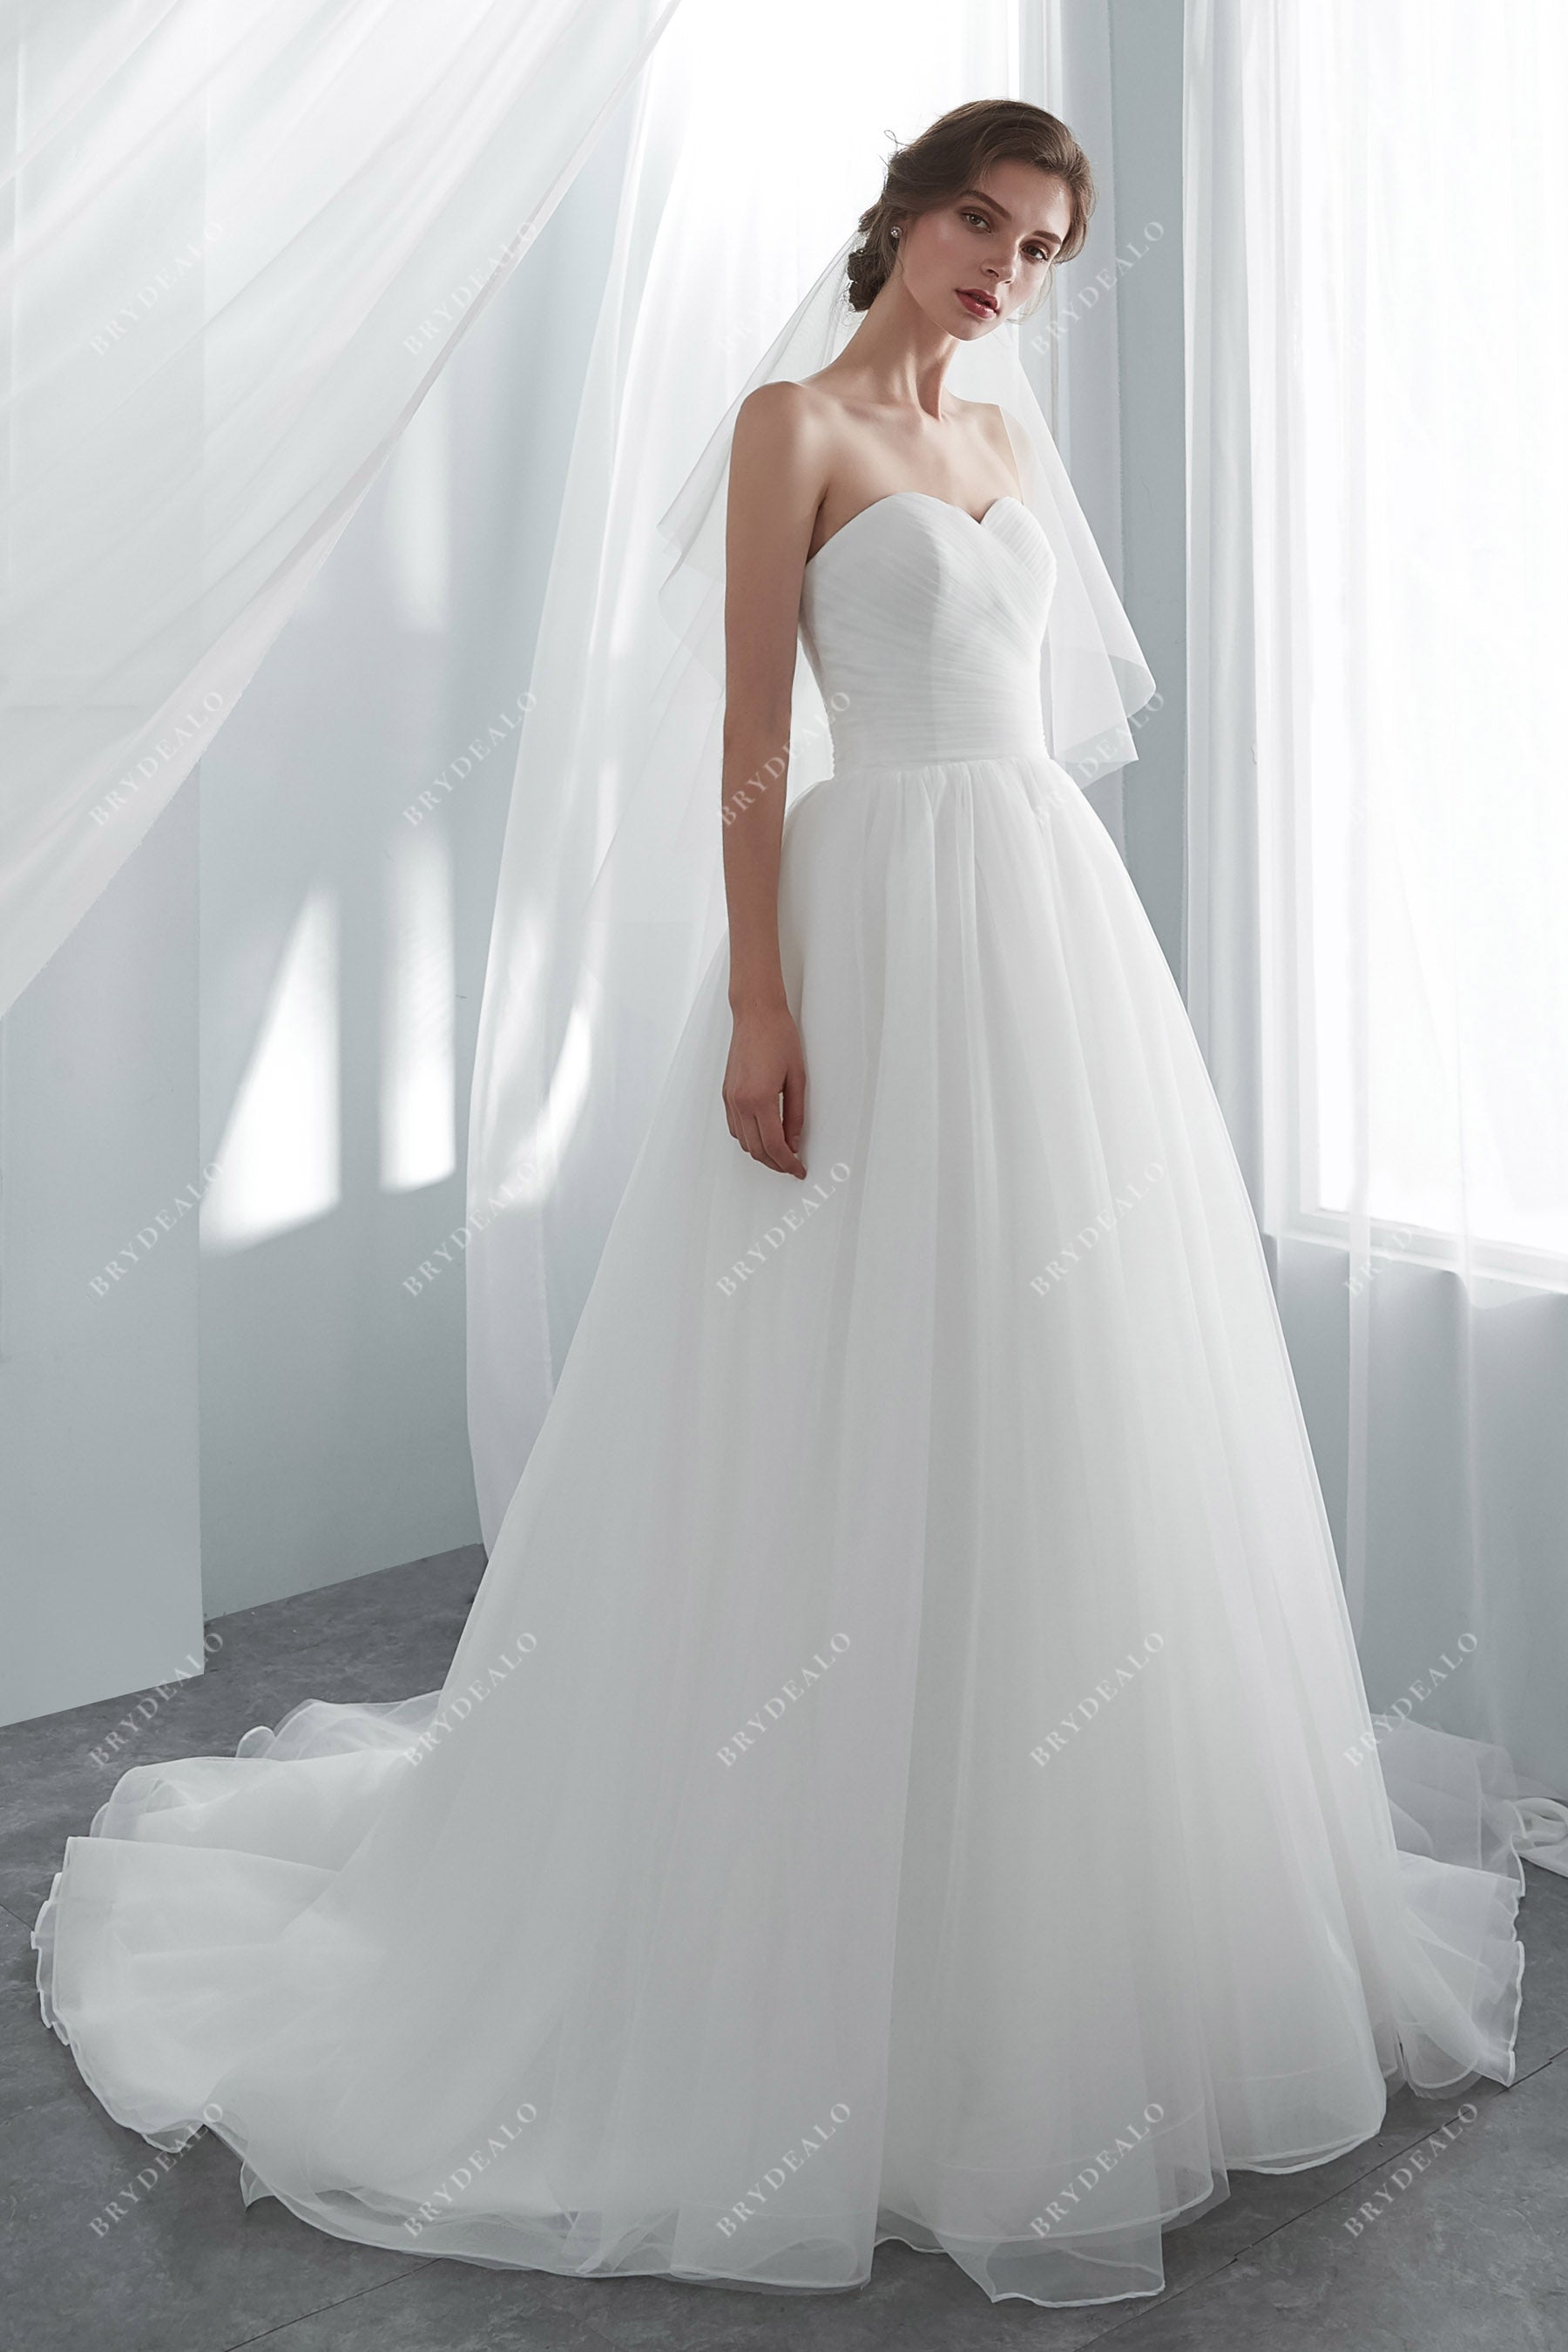 Simple Strapless Sweetheart Bridal Gown